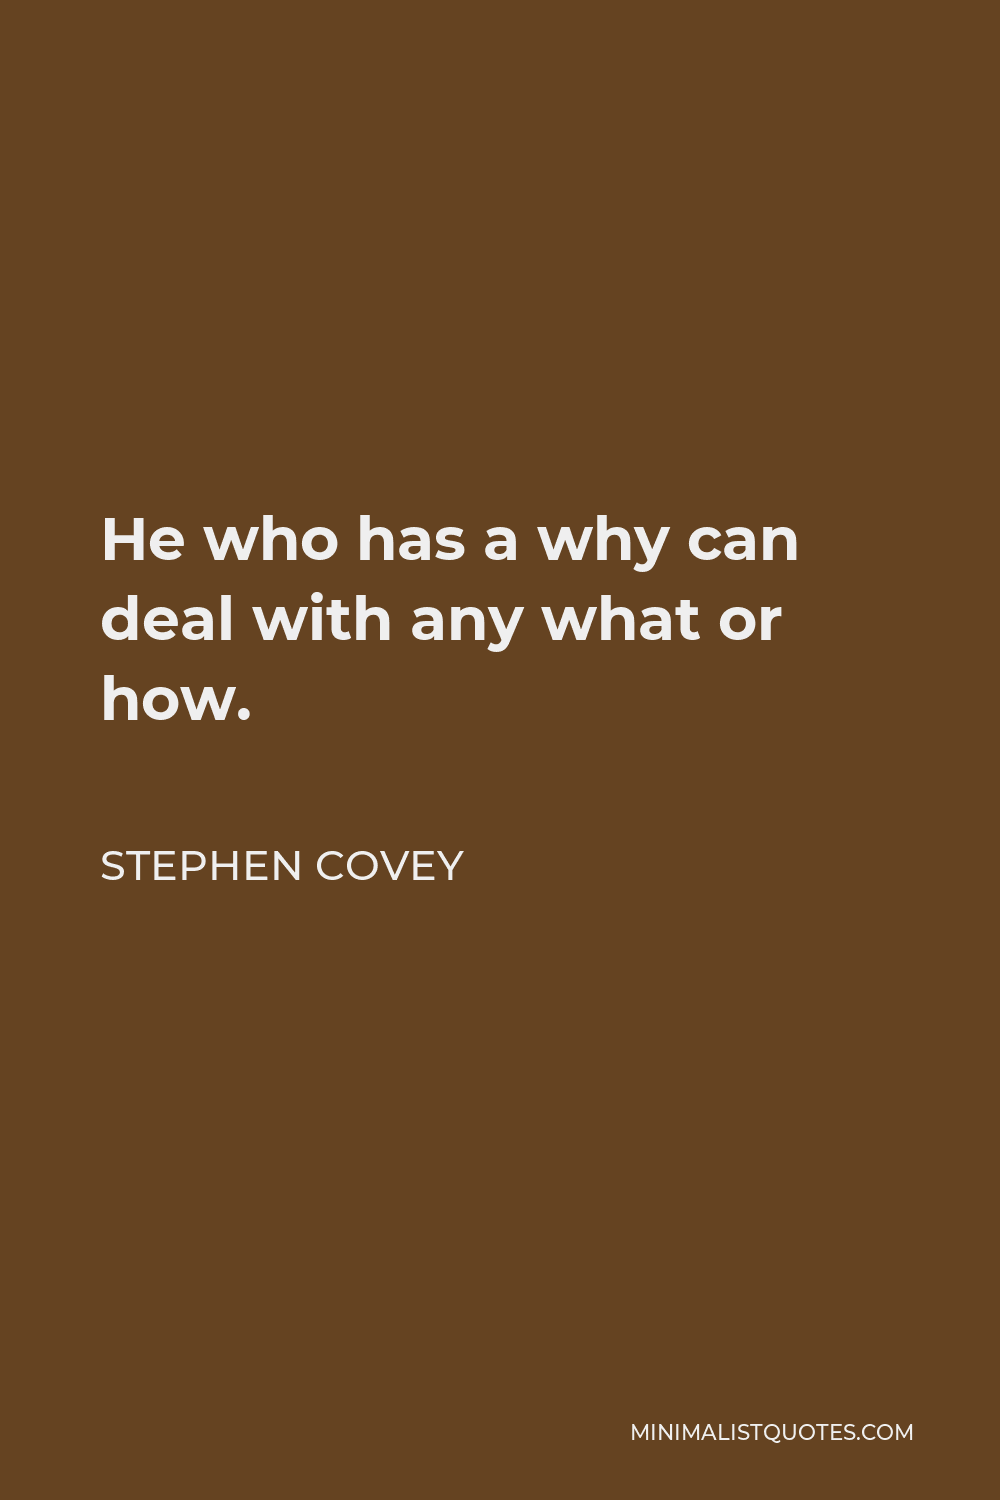 Stephen Covey Quote - He who has a why can deal with any what or how.